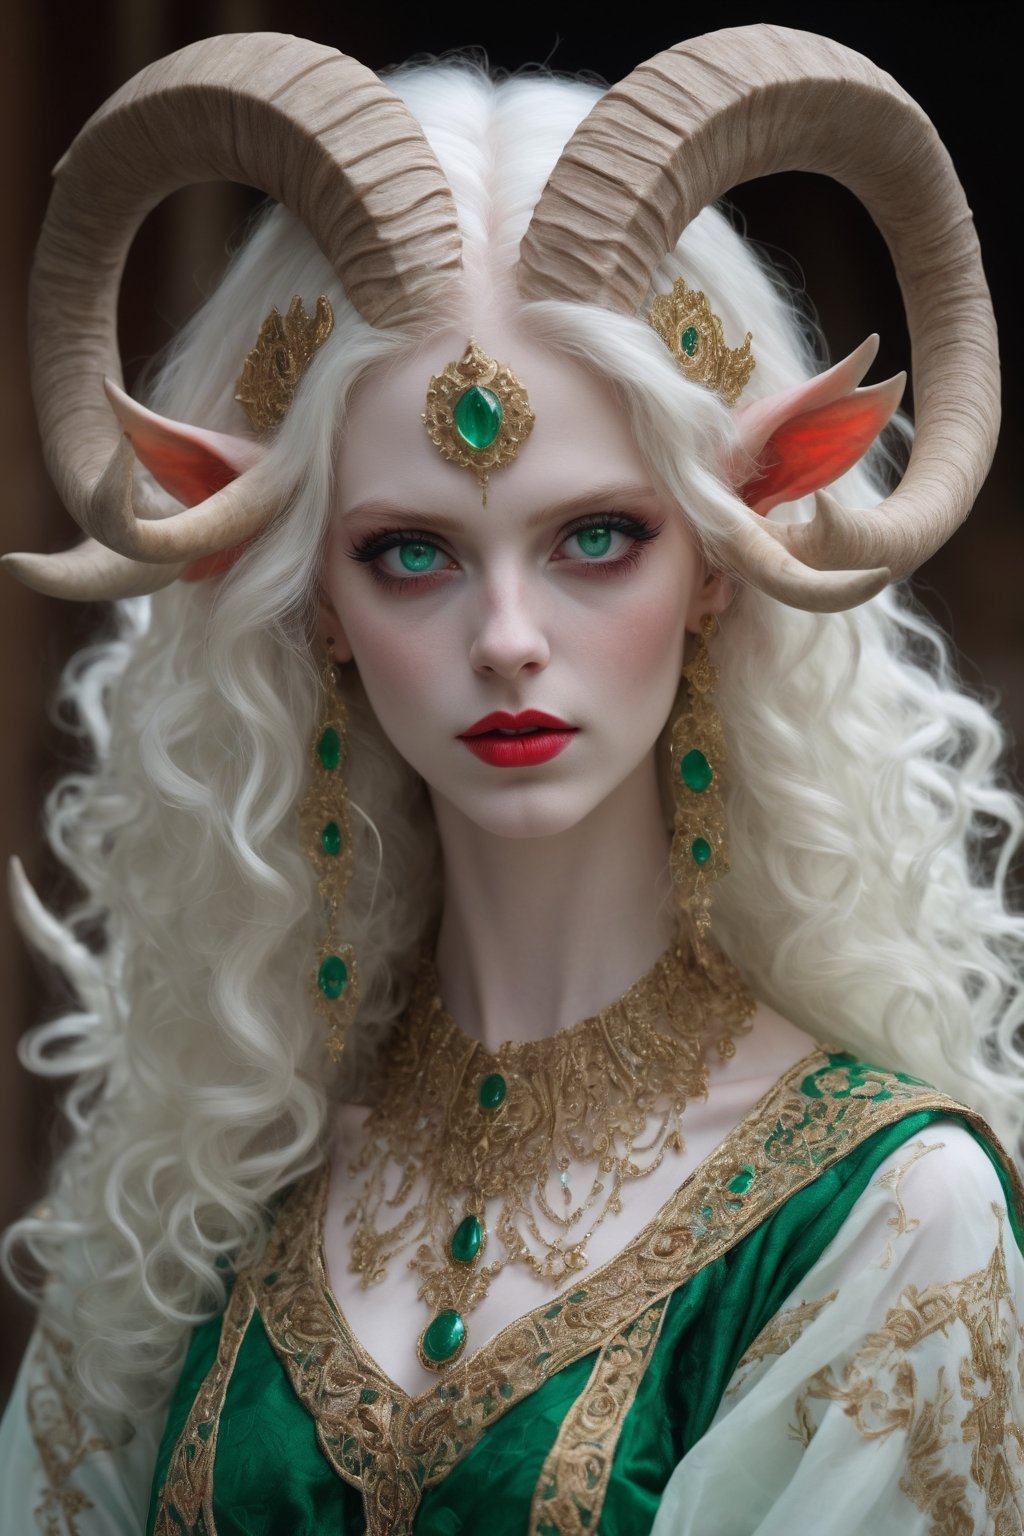 An albino Persian devil girl (long intricate horns: 1.2) in traditional Italian and Sardinian costume, endlessly beautiful emerald eyes, her ethereal presence accentuated by the transparency of her pale skin, her striking emerald eyes radiating an otherworldly glow,
Break
Wrapped in the vibrant colors and intricate designs of her artistically embroidered blouse, colorful skirt, apron, and Sardinian folk costume in red and white tones, she exudes an enchanting allure that transcends the realms of fantasy and reality,photo_b00ster